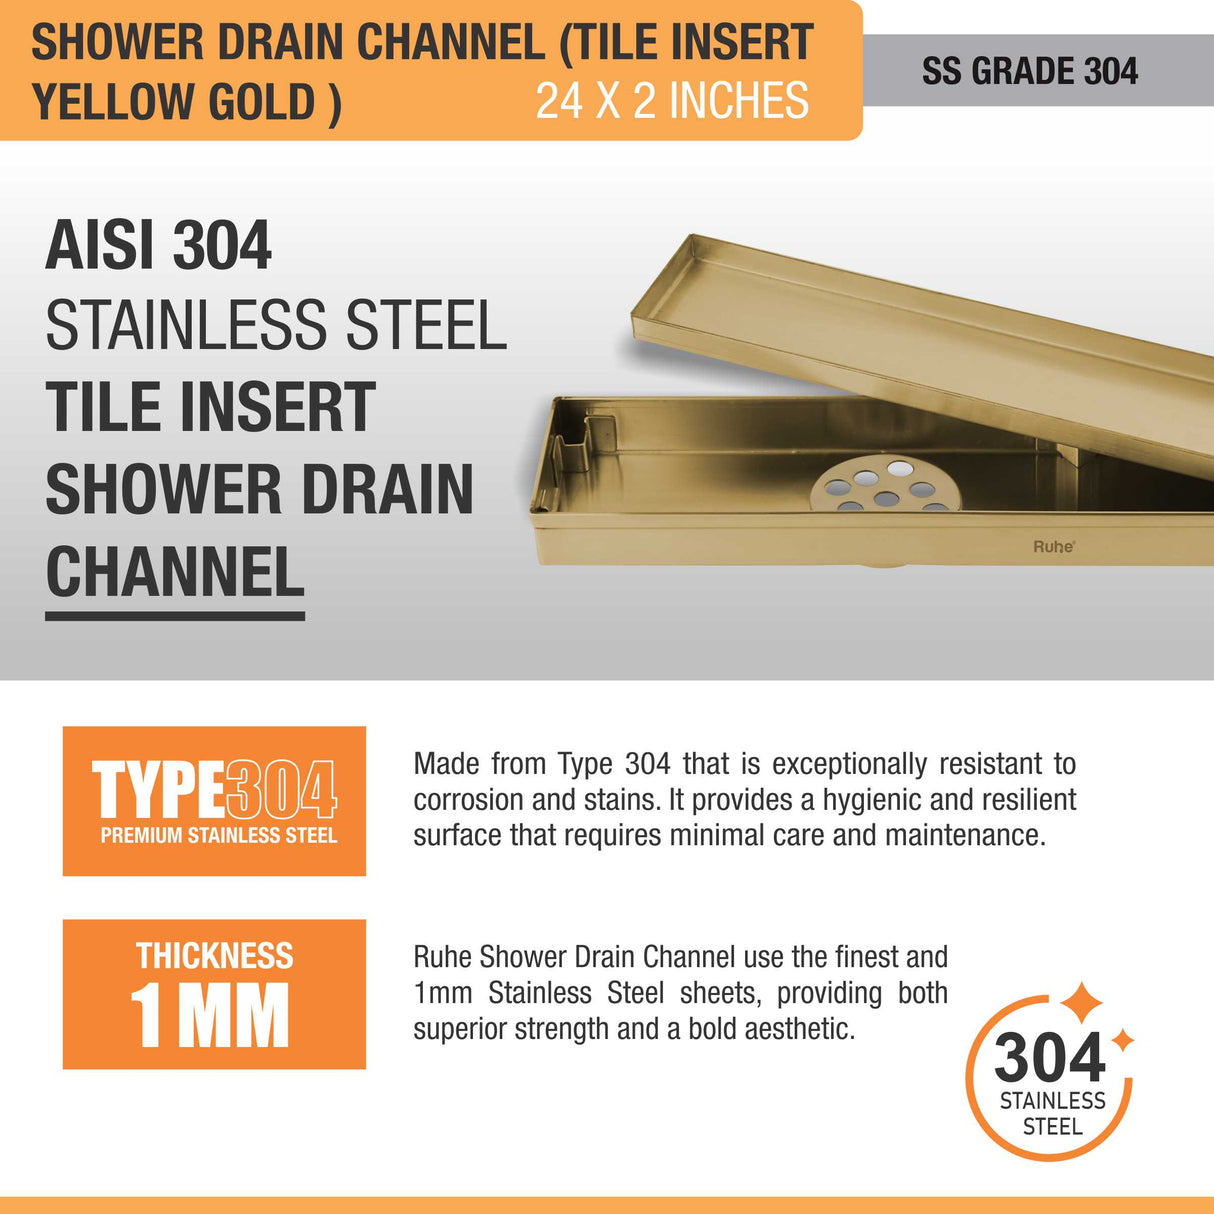 Tile Insert Shower Drain Channel (24 x 2 Inches) YELLOW GOLD stainless steel